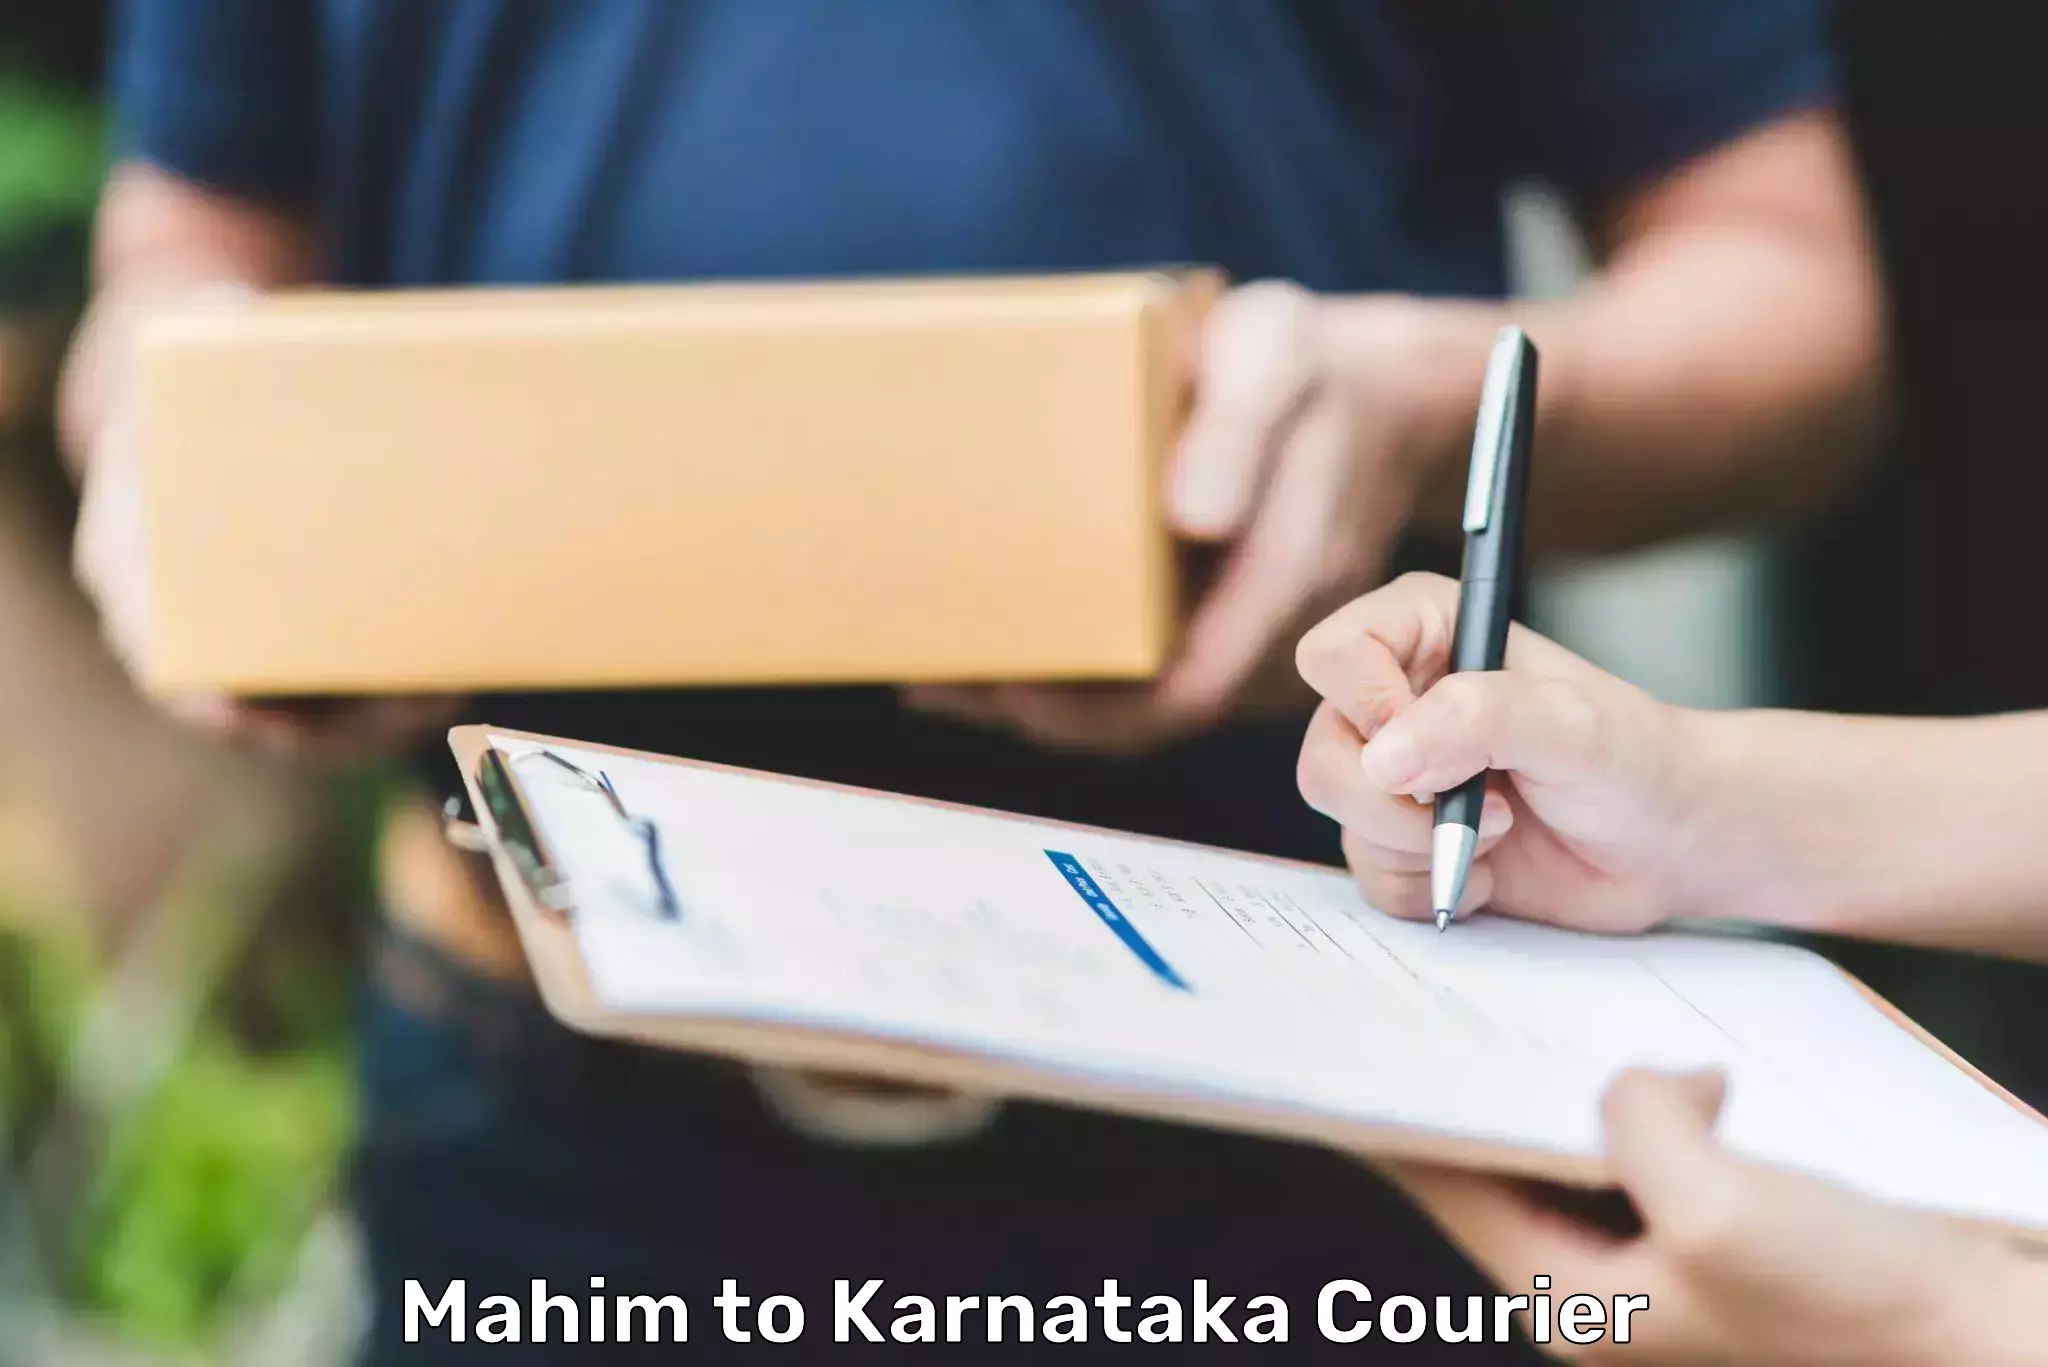 International courier networks Mahim to Kollegal